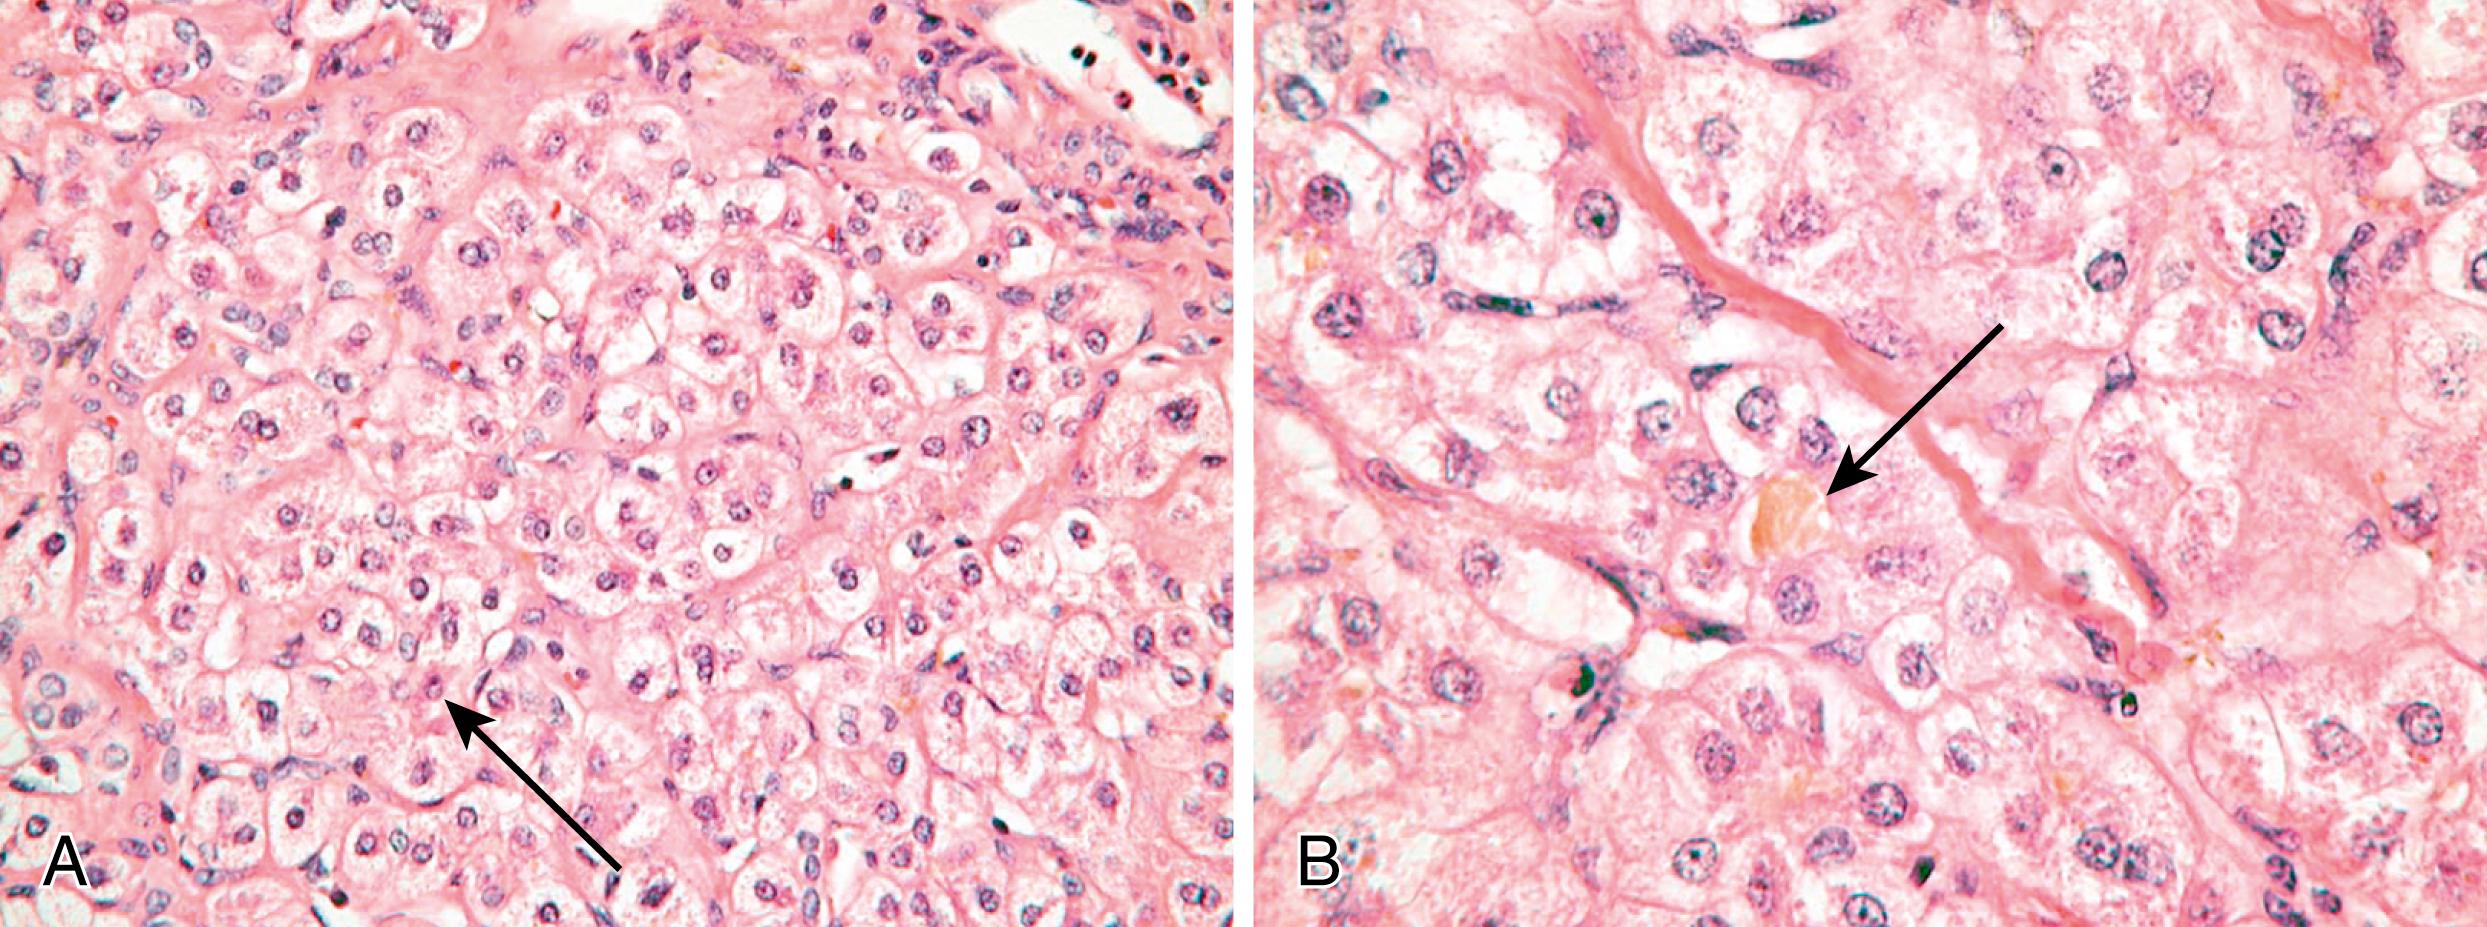 Fig. 70.2, Liver histopathology in progressive familial intrahepatic cholestasis type 1 (PFIC-1) (FIC1) disease with (A) hepatocyte swelling due to hepatocellular and canalicular cholestasis and (B) bile canaliculi distended with thick bile (arrow) .